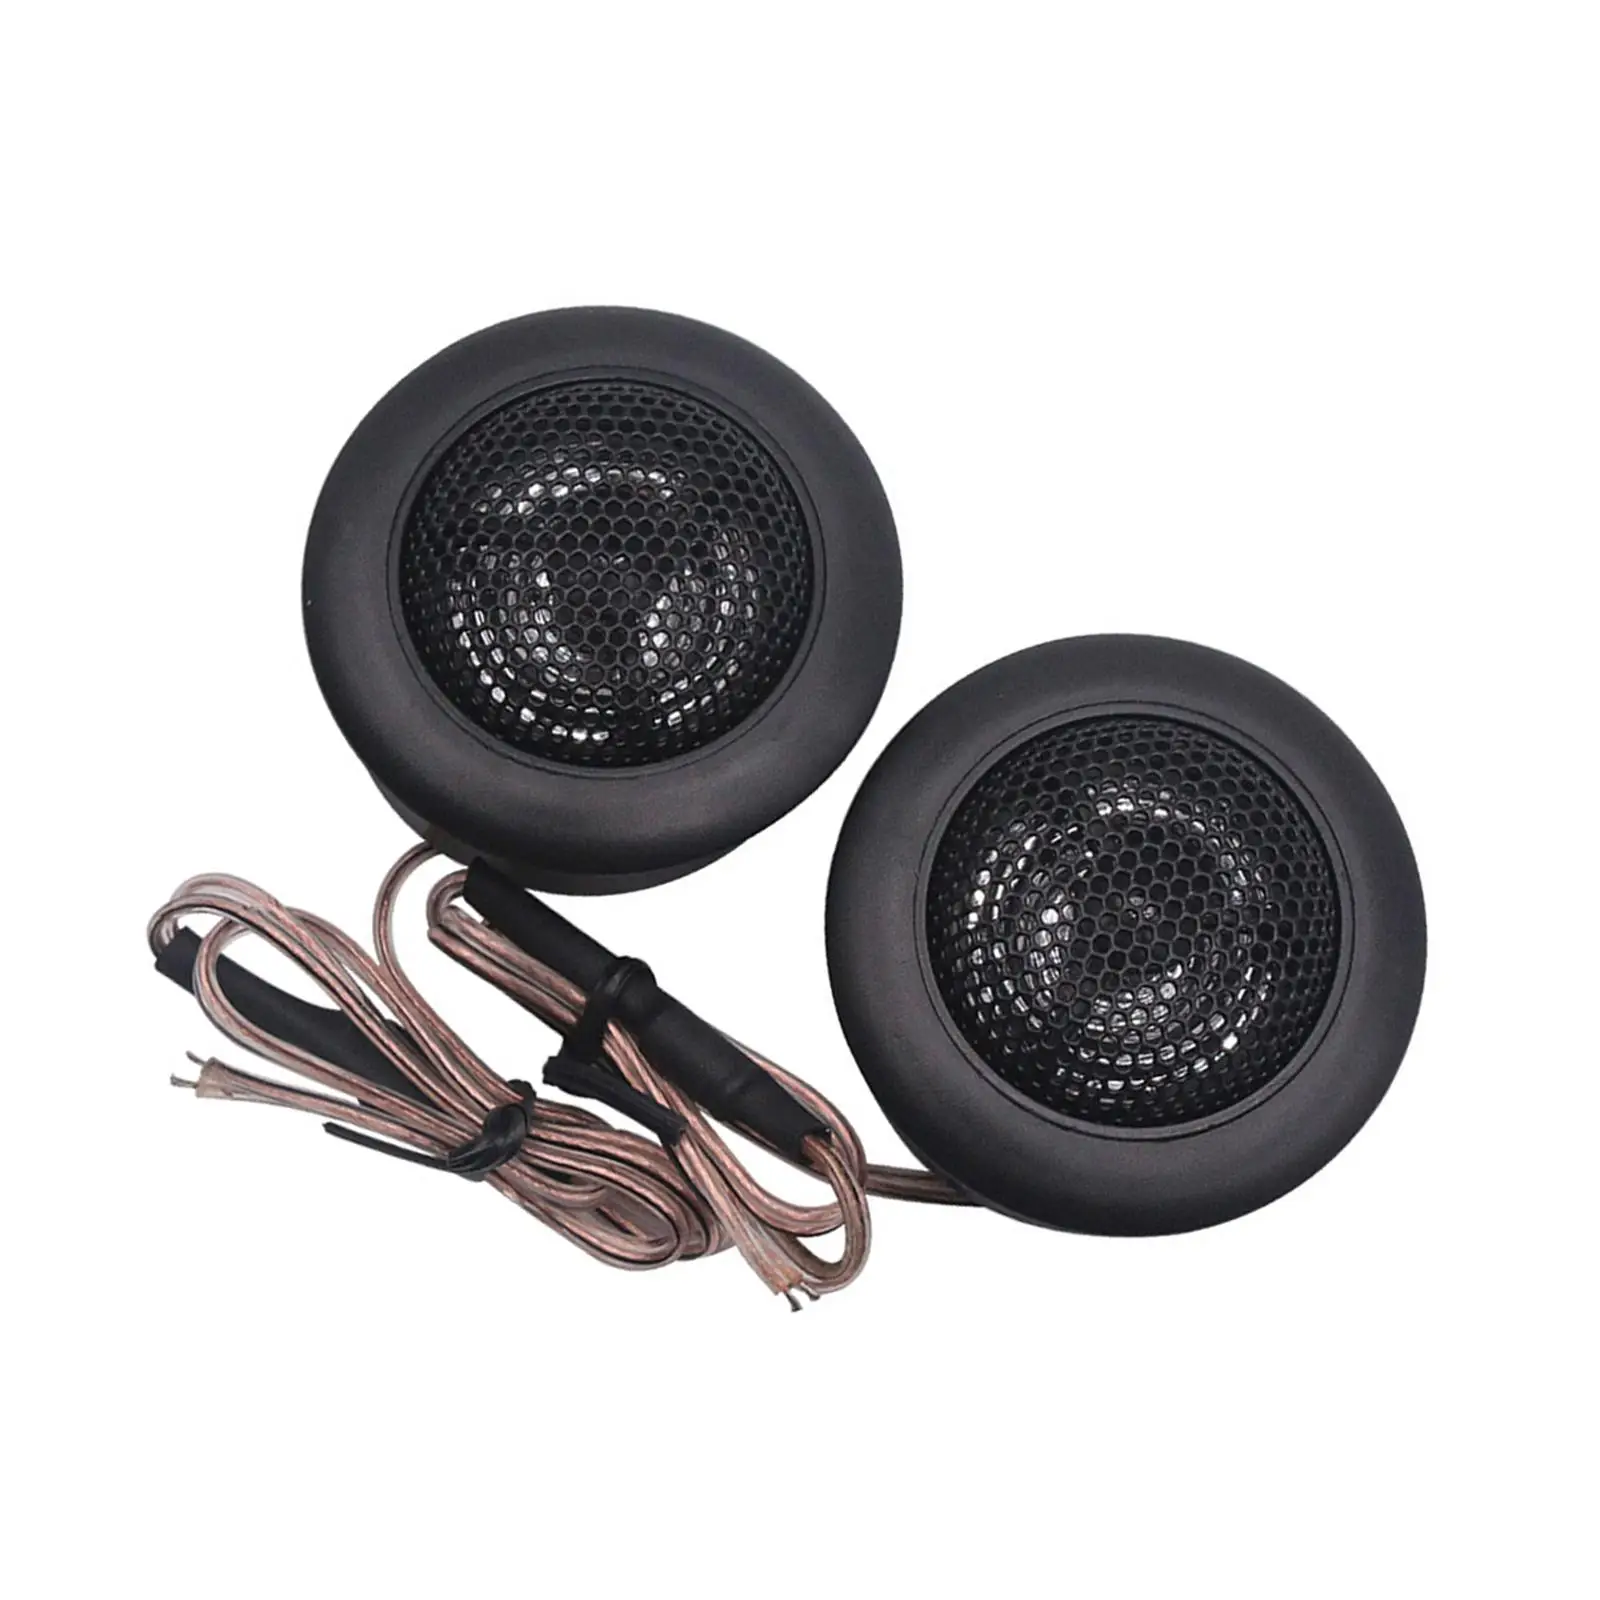 Car Audio Speaker High Performance for Car Audio System Durable Accessory